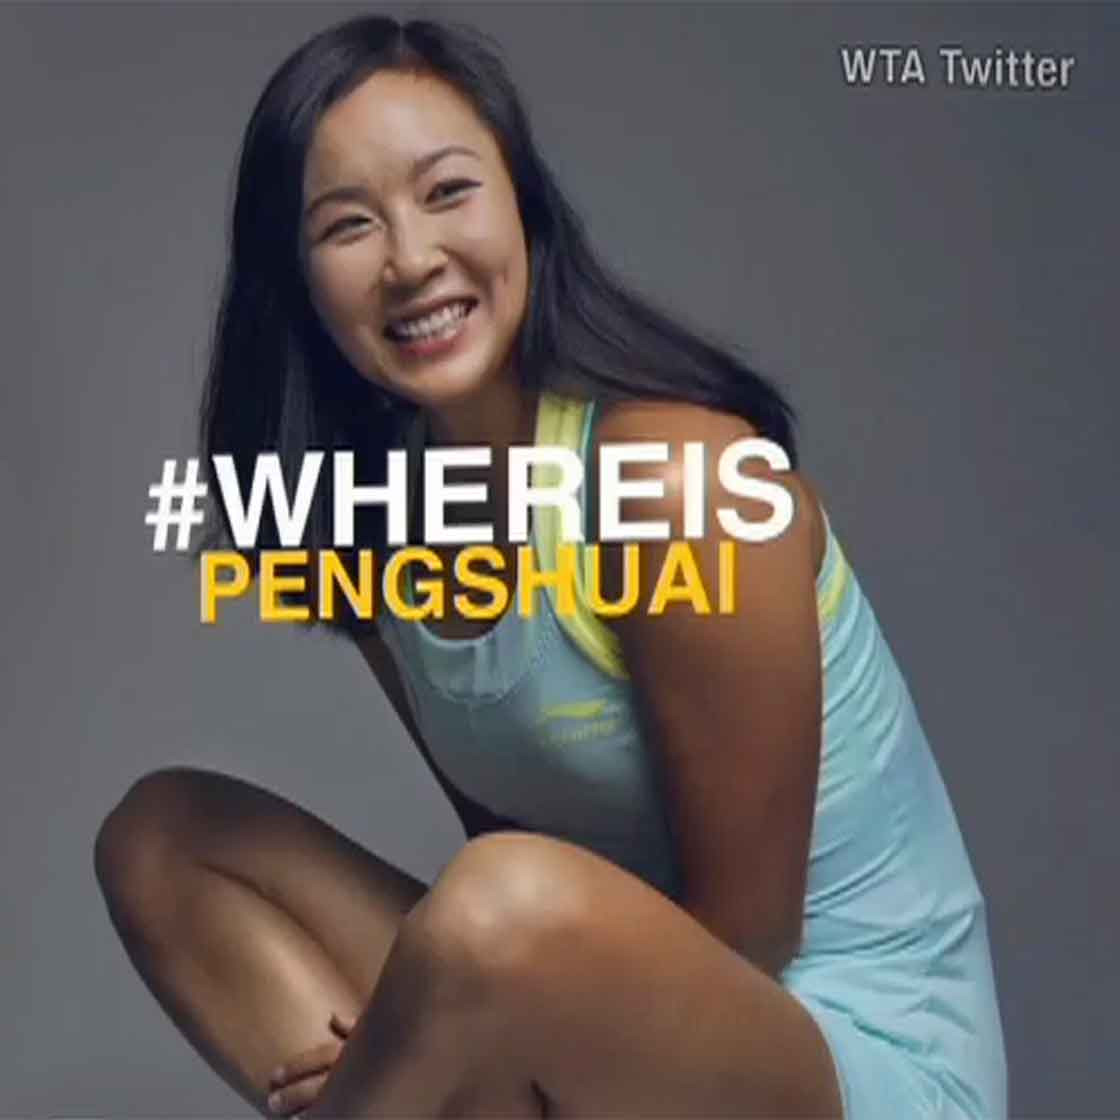 Concerns grow over Chinese tennis star’s safety